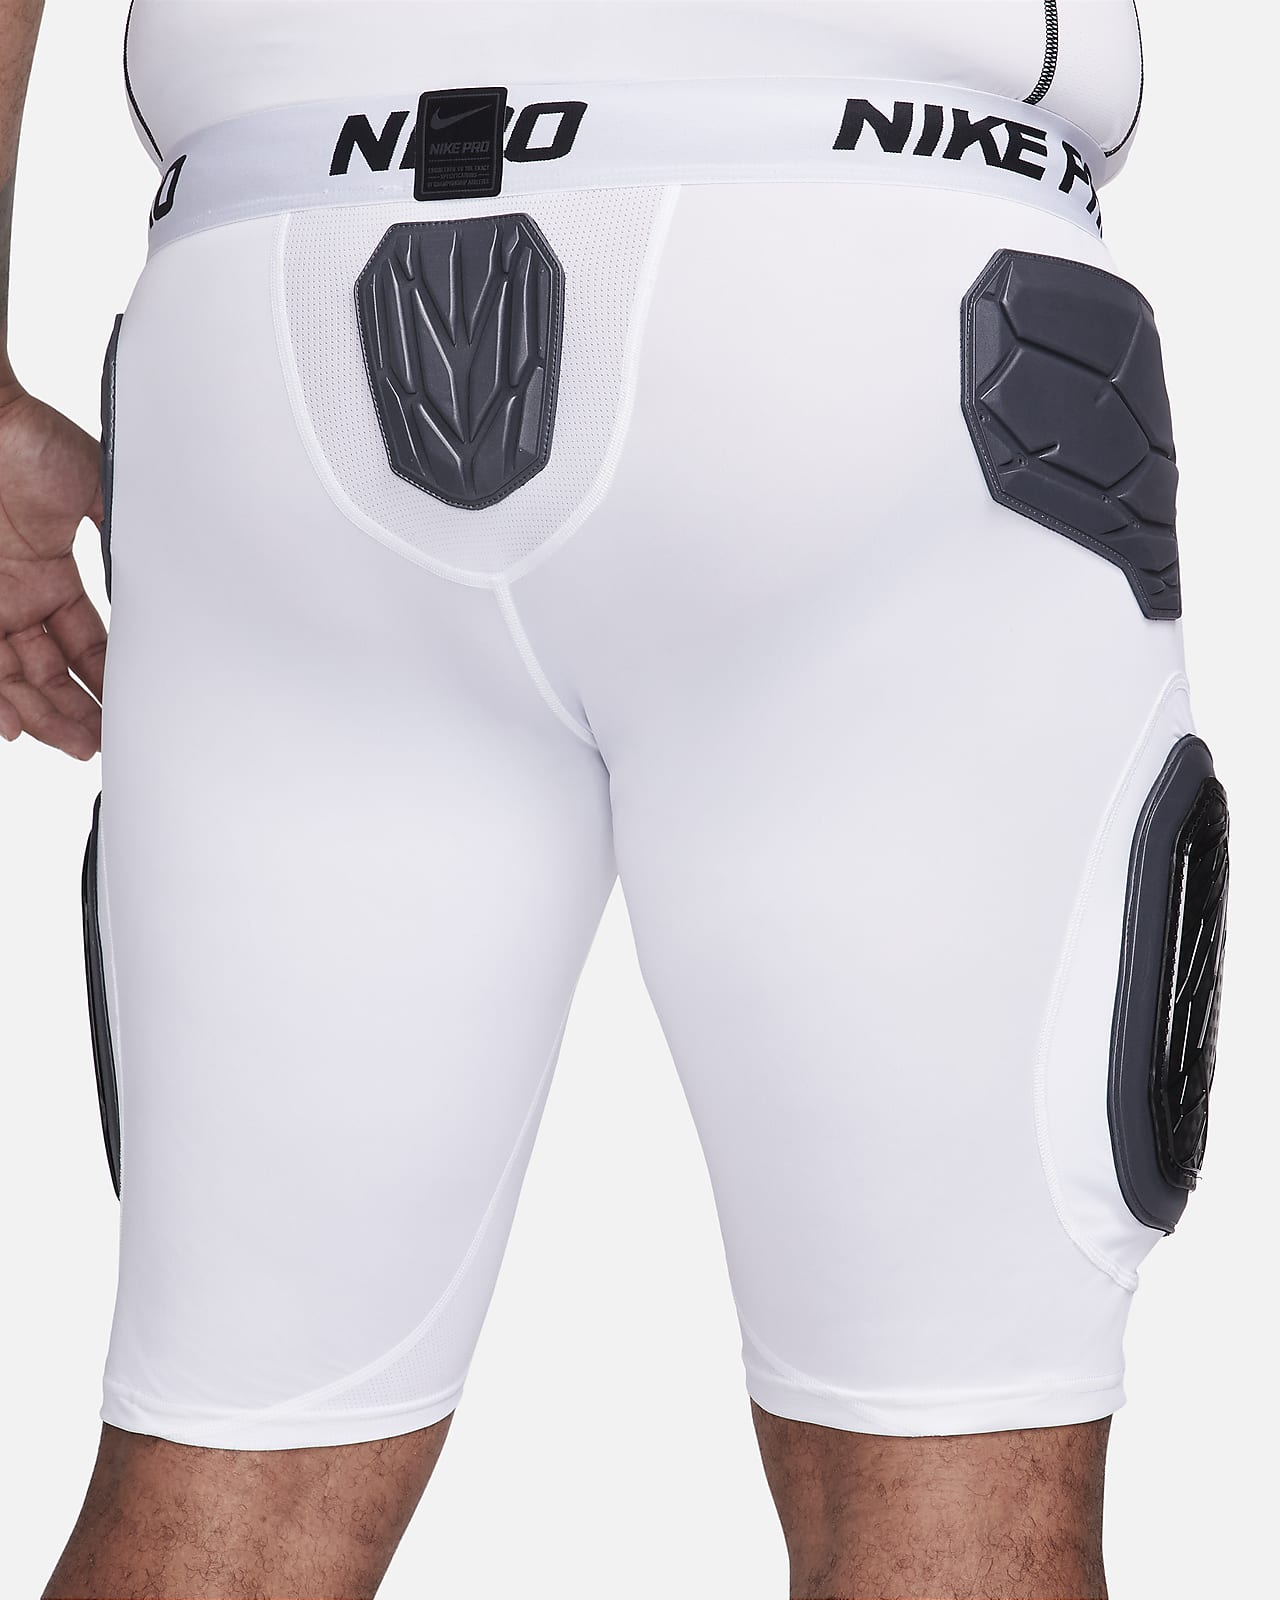 Nike Pro Hyperstrong Padded Compression Shorts Men's White/Gray New with  Tags 3XL - Locker Room Direct